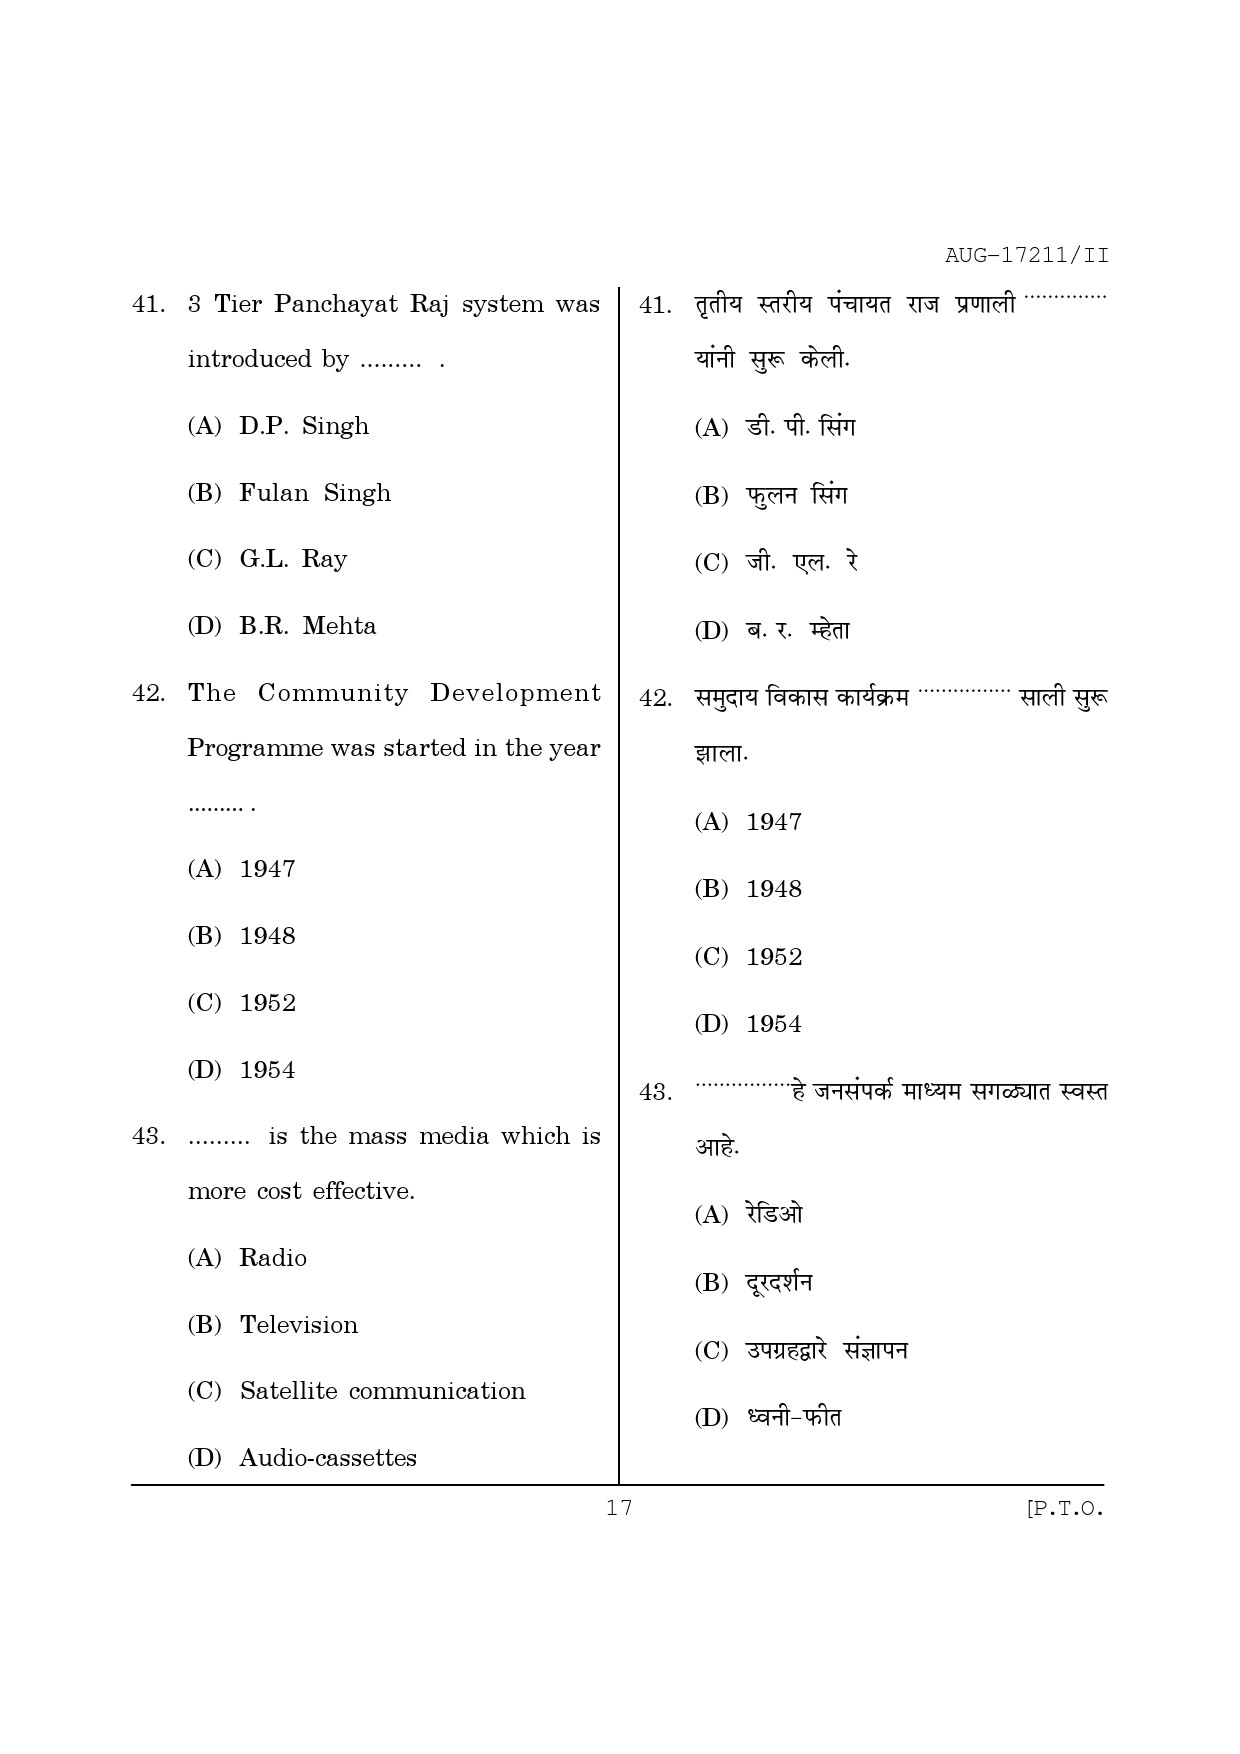 Maharashtra SET Home Science Question Paper II August 2011 17